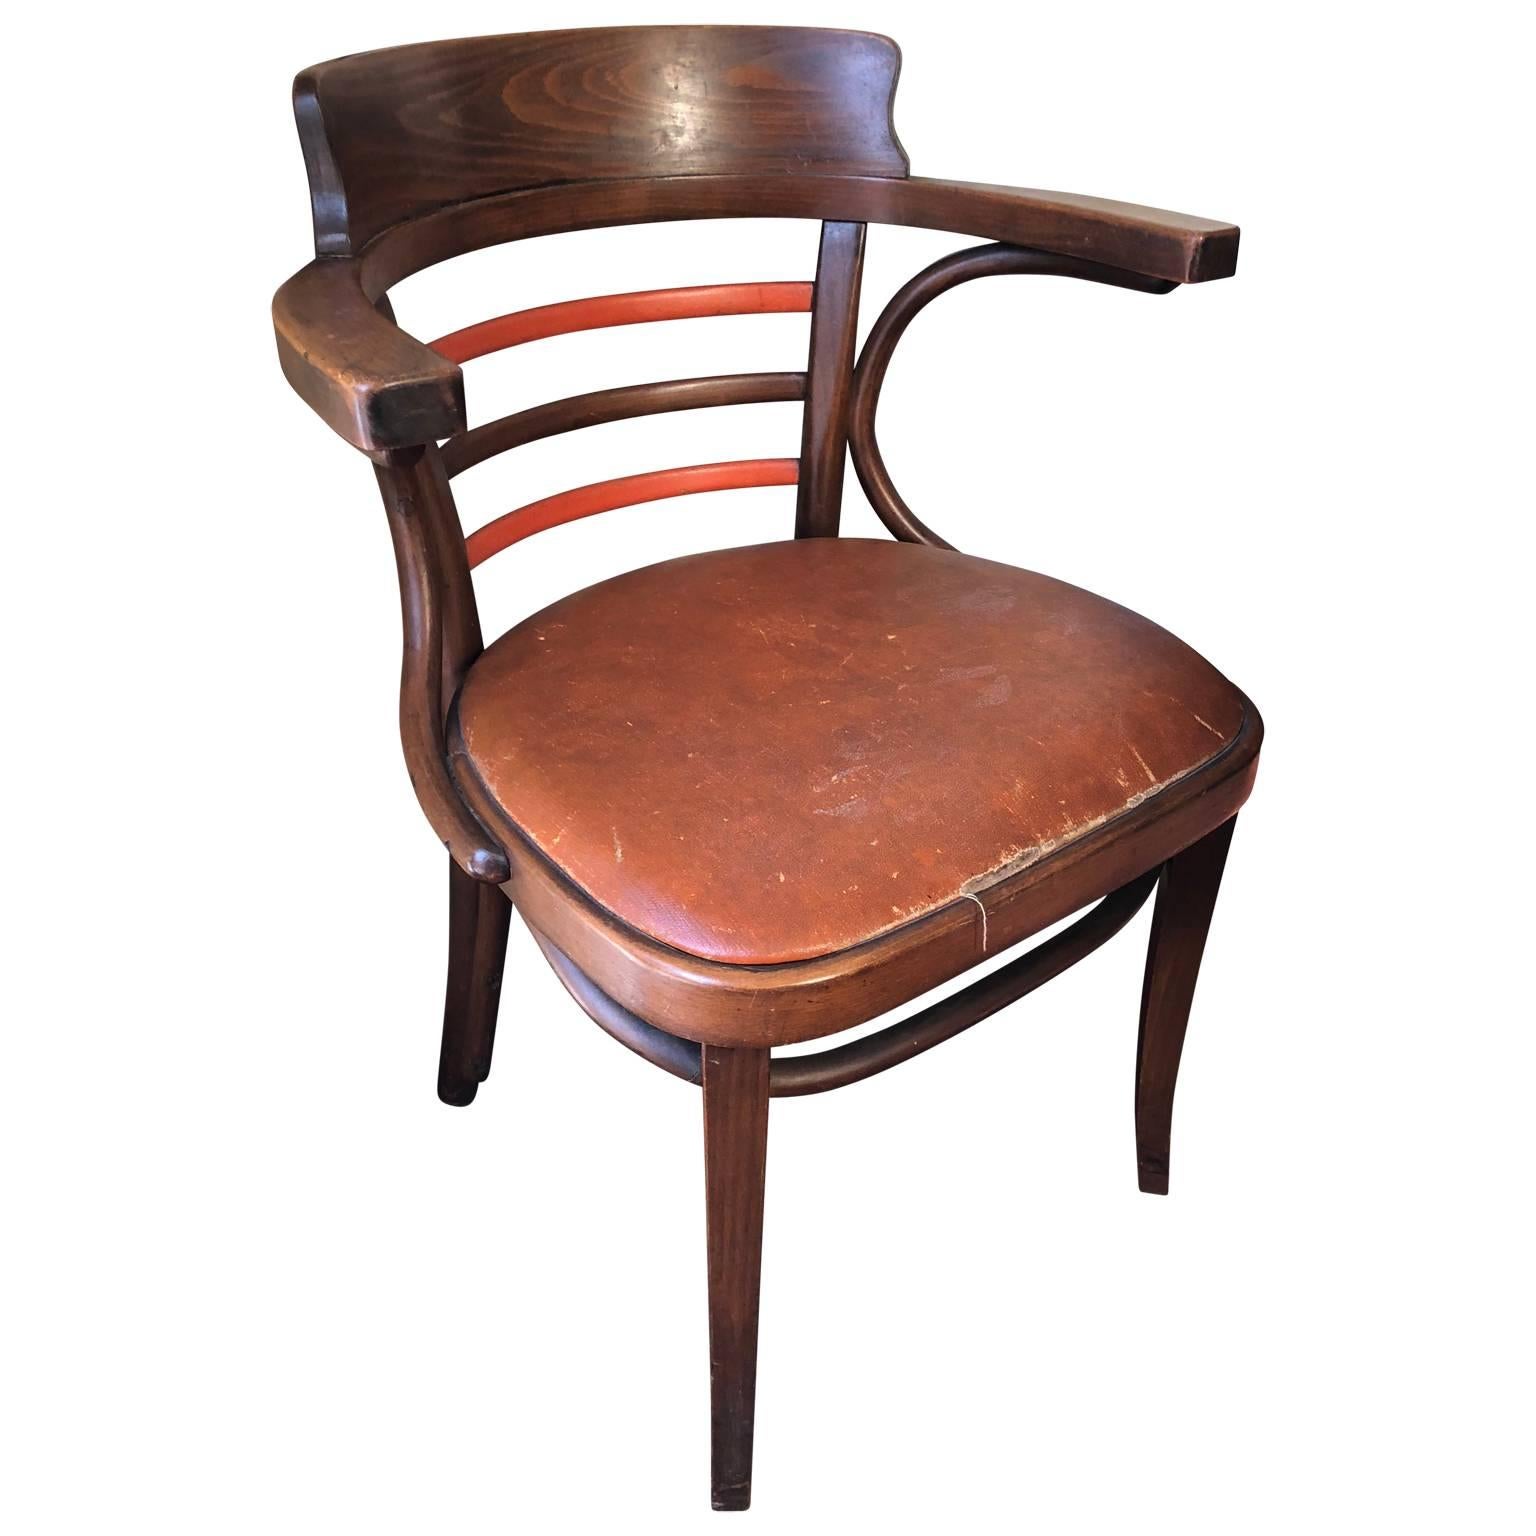 Early bentwood arm or desk chair by J. & J. Kohn Mundus, this one with red painted horizontal back bars.

$125 flat rate front door delivery includes Washington DC metro, Baltimore and Philadelphia